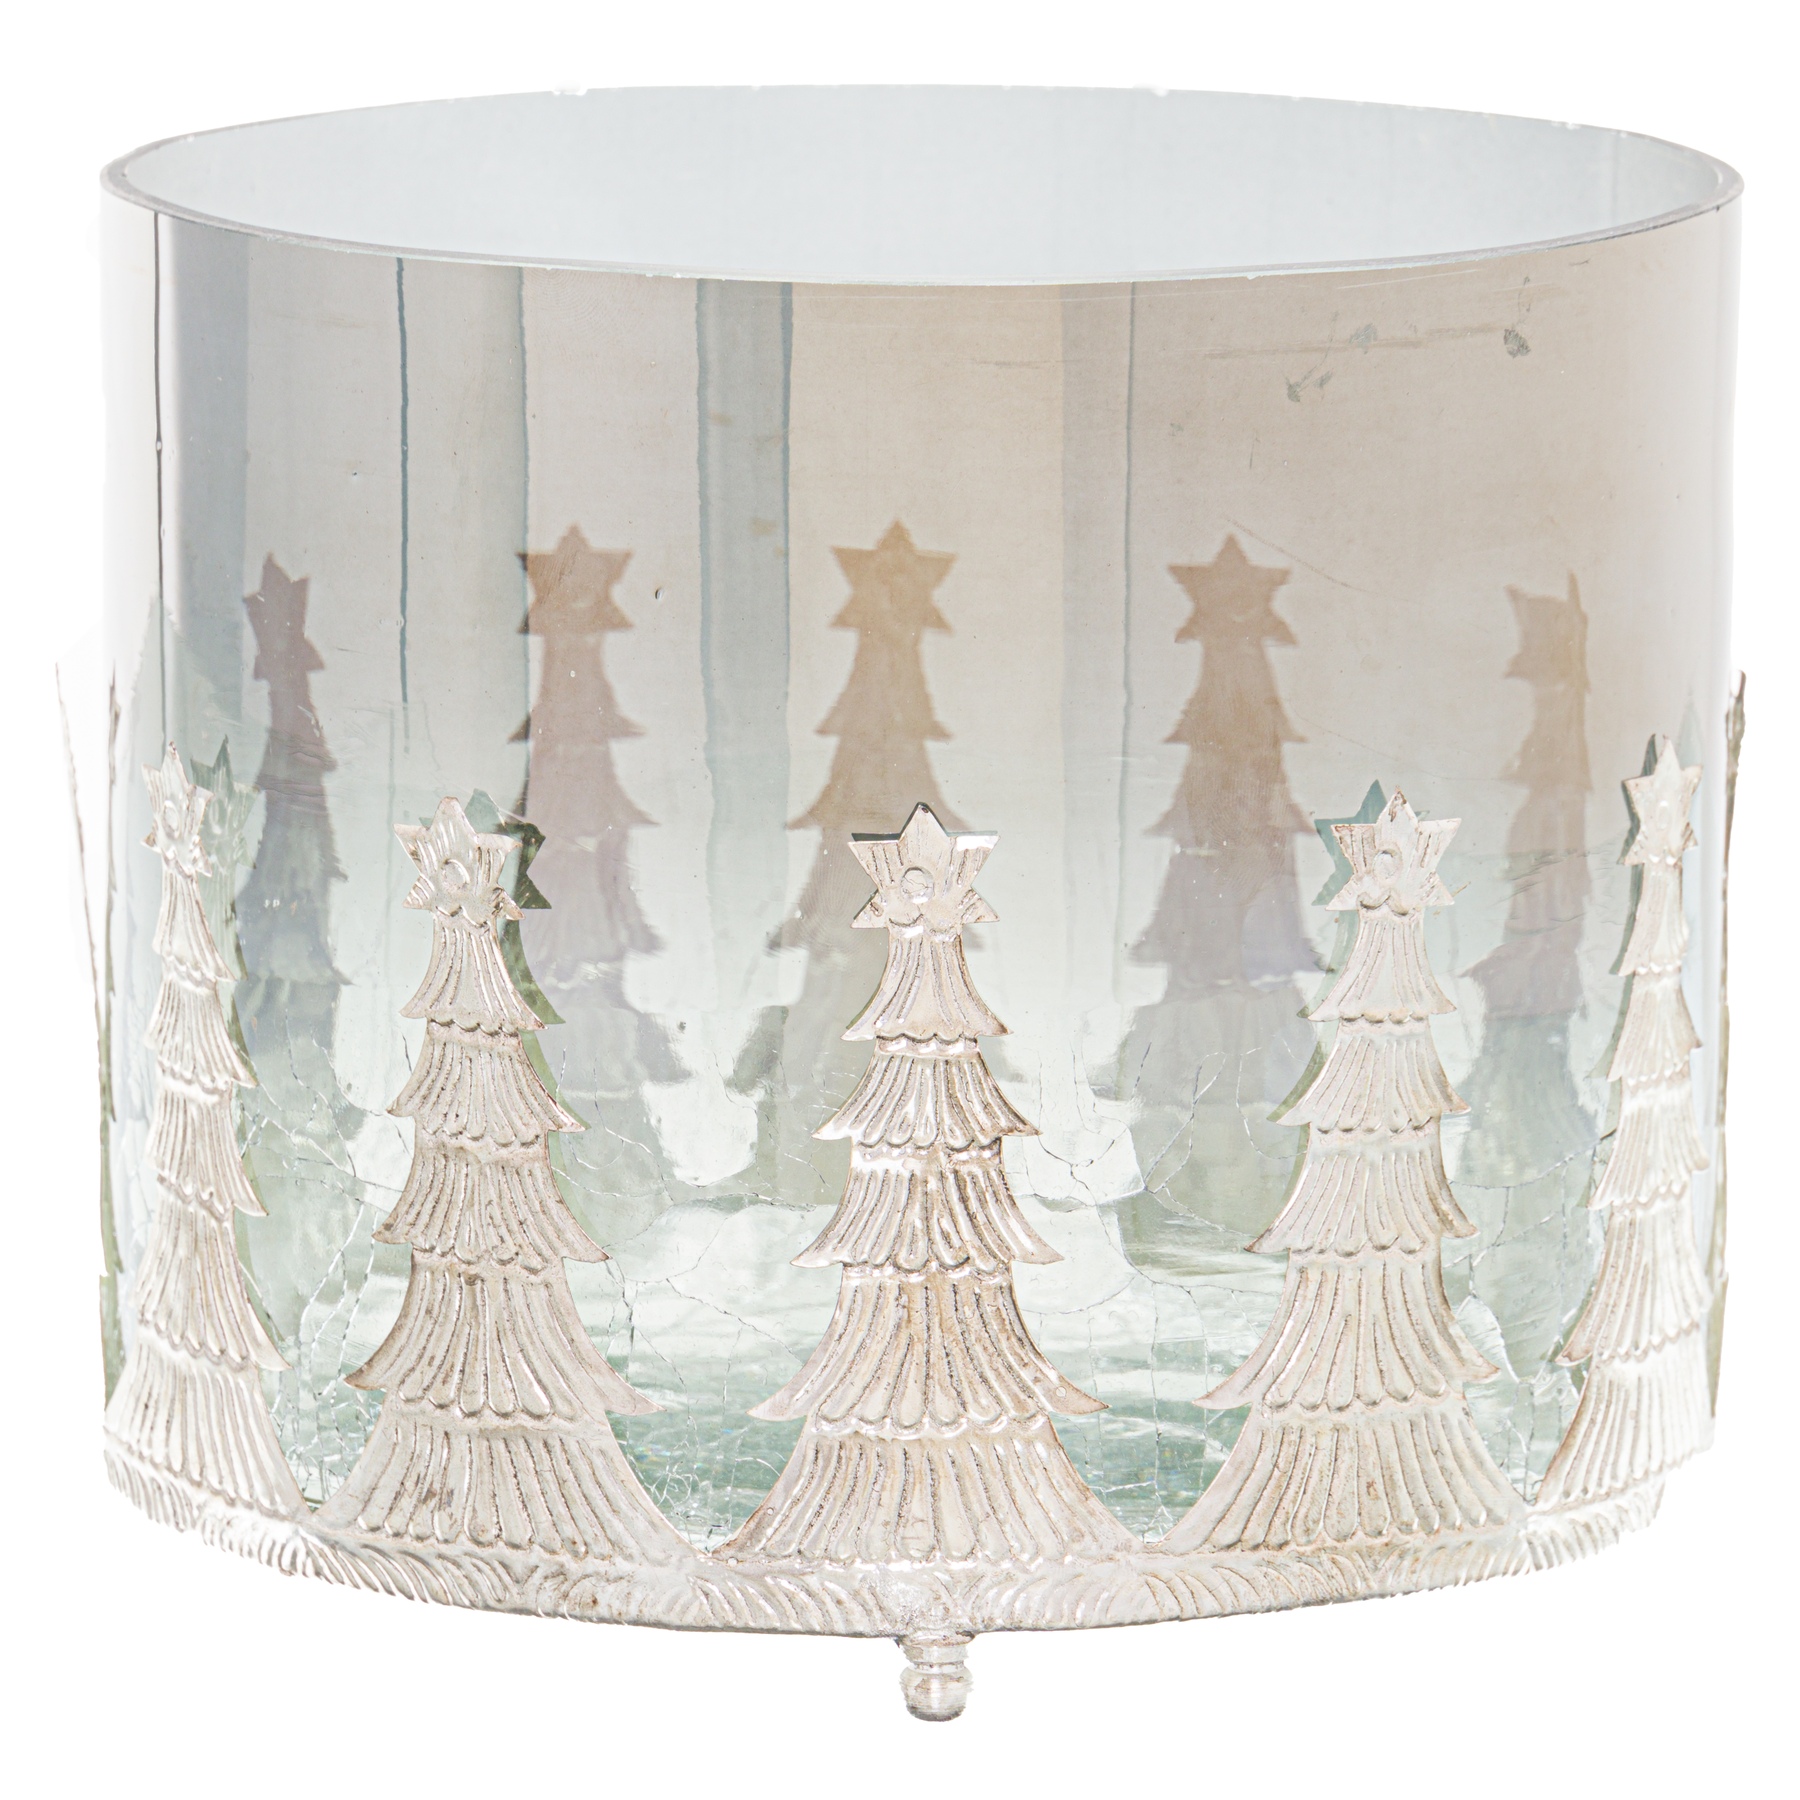 Noel Collection Large Christmas Tree Crackled Candle Holder - Image 1